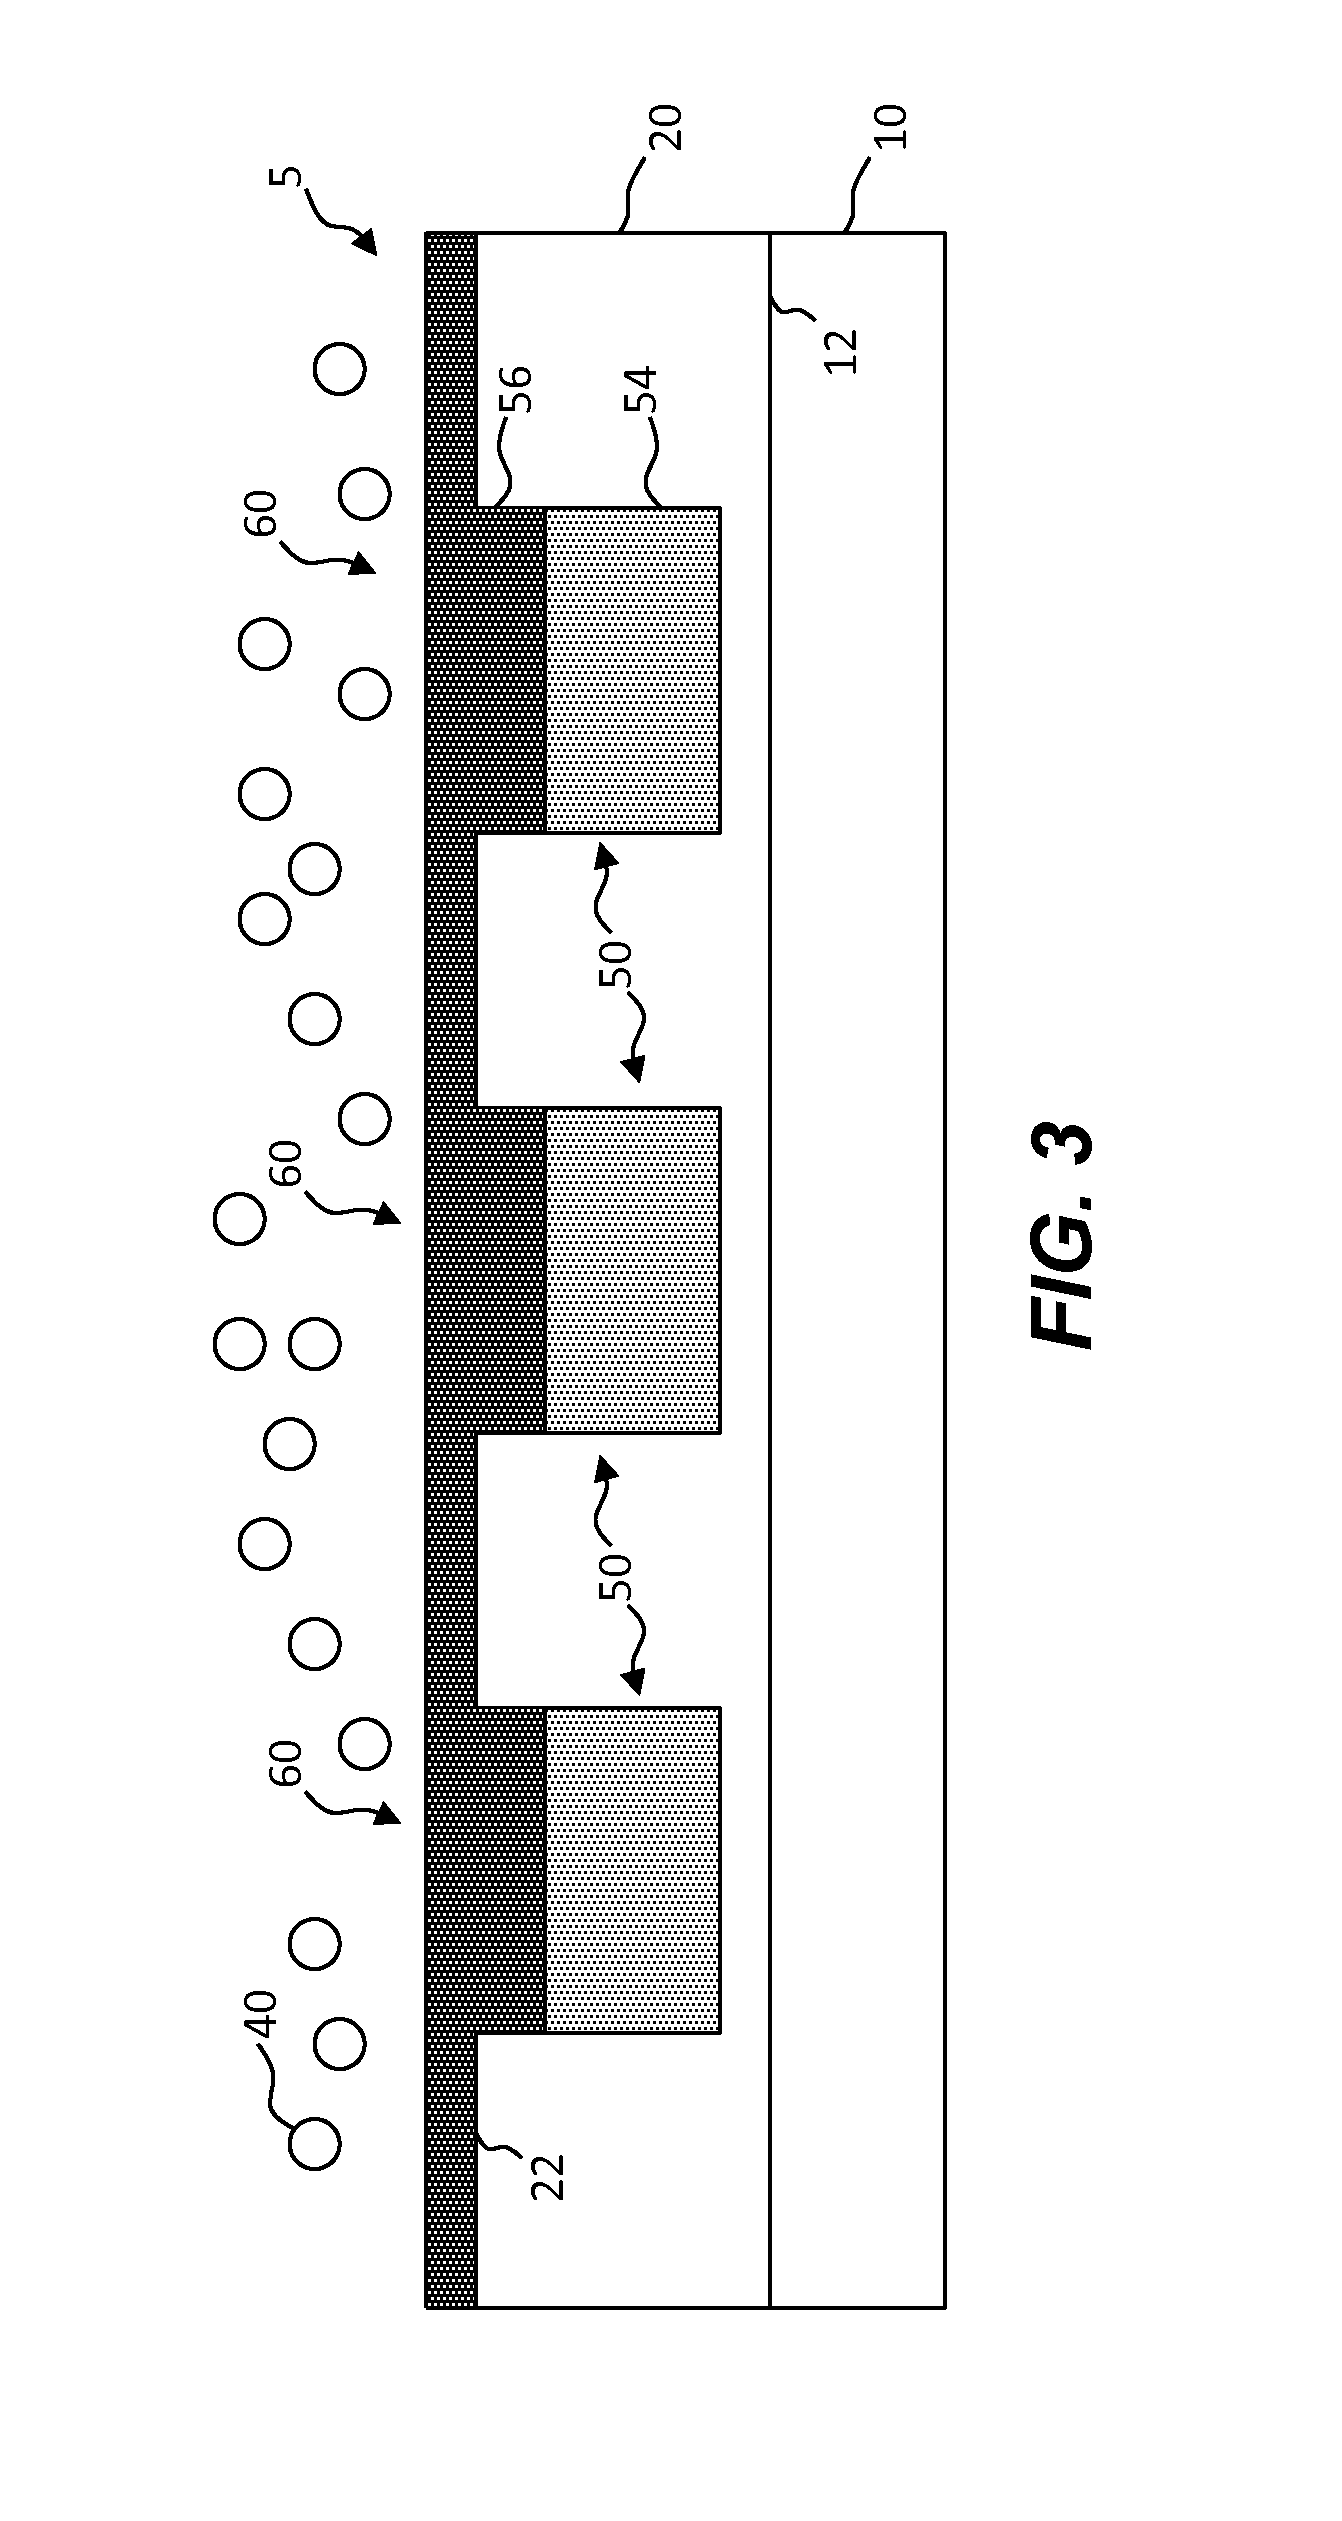 Imprinted thin-film electronic sensor structure